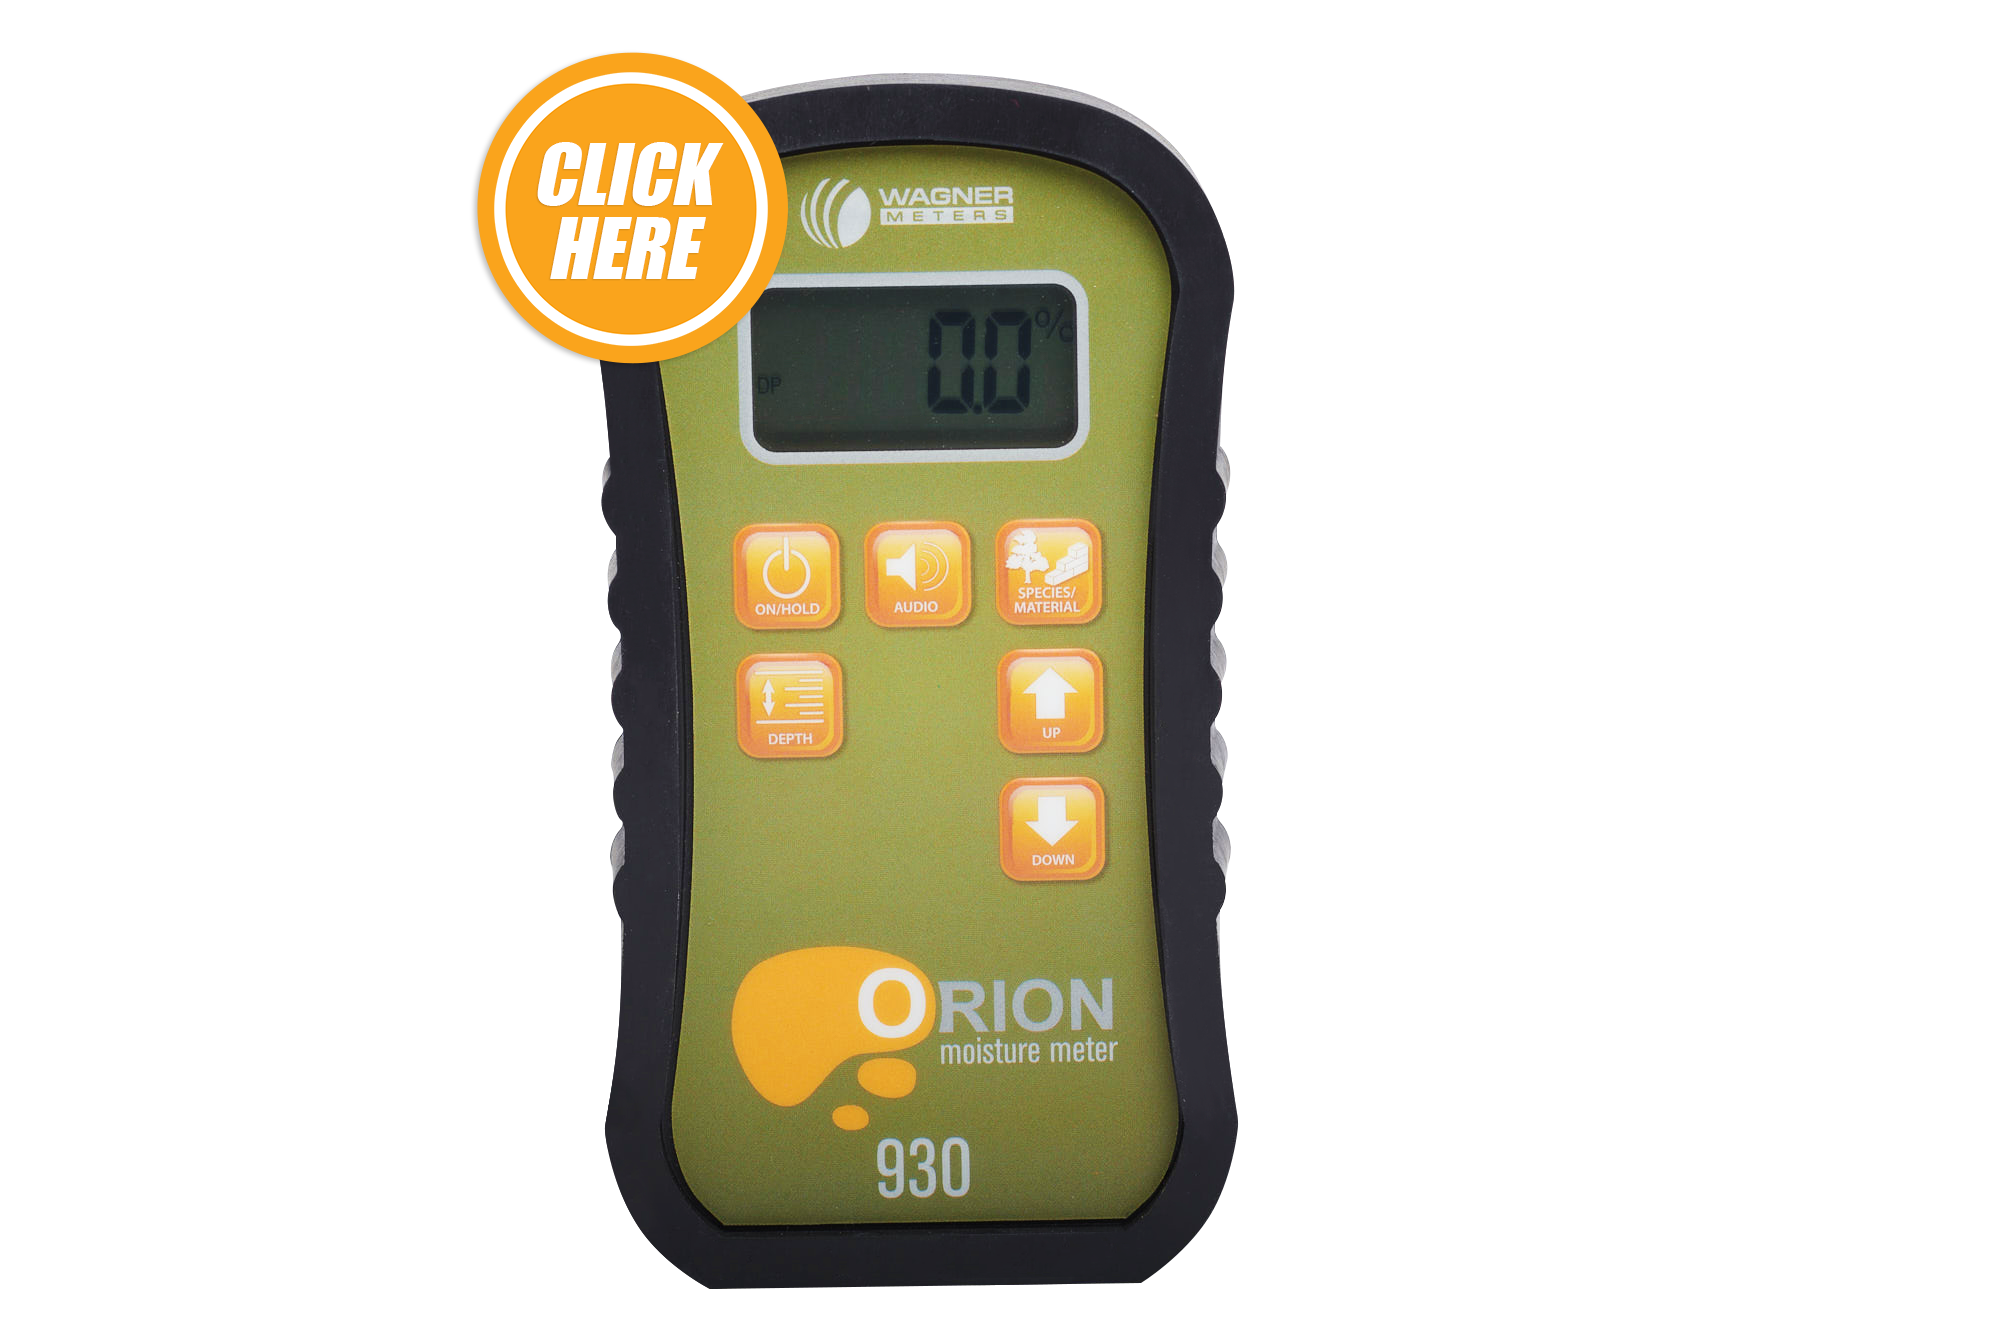 Click here to purchase the Orion 930